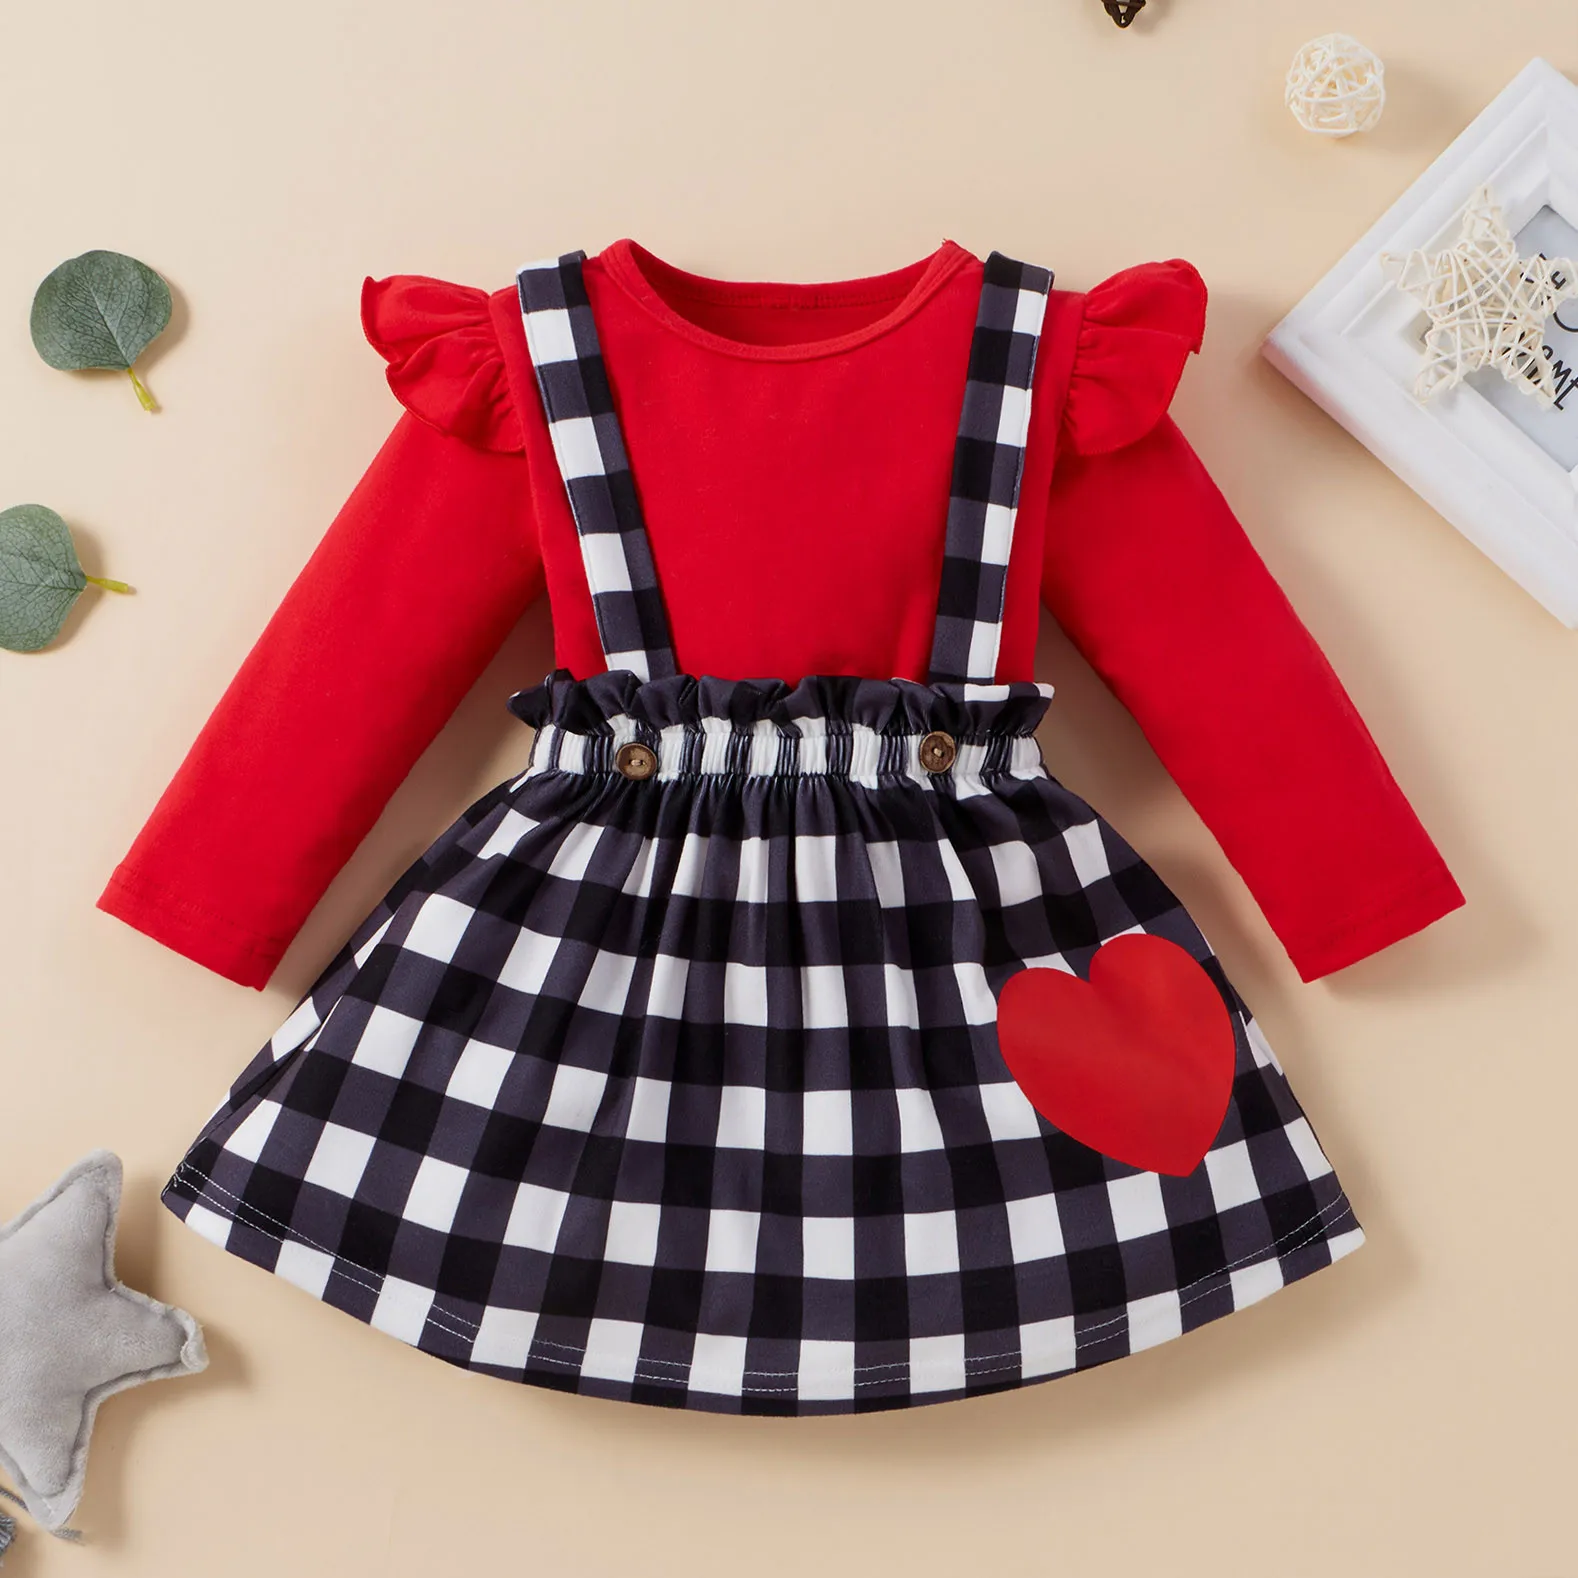 

Infant Kids Girls Clothes Sets Valentine's Day Toddler Baby Girls Long Sleeve Tops+Hearts Plaid Suspender Skirts Outfits Set